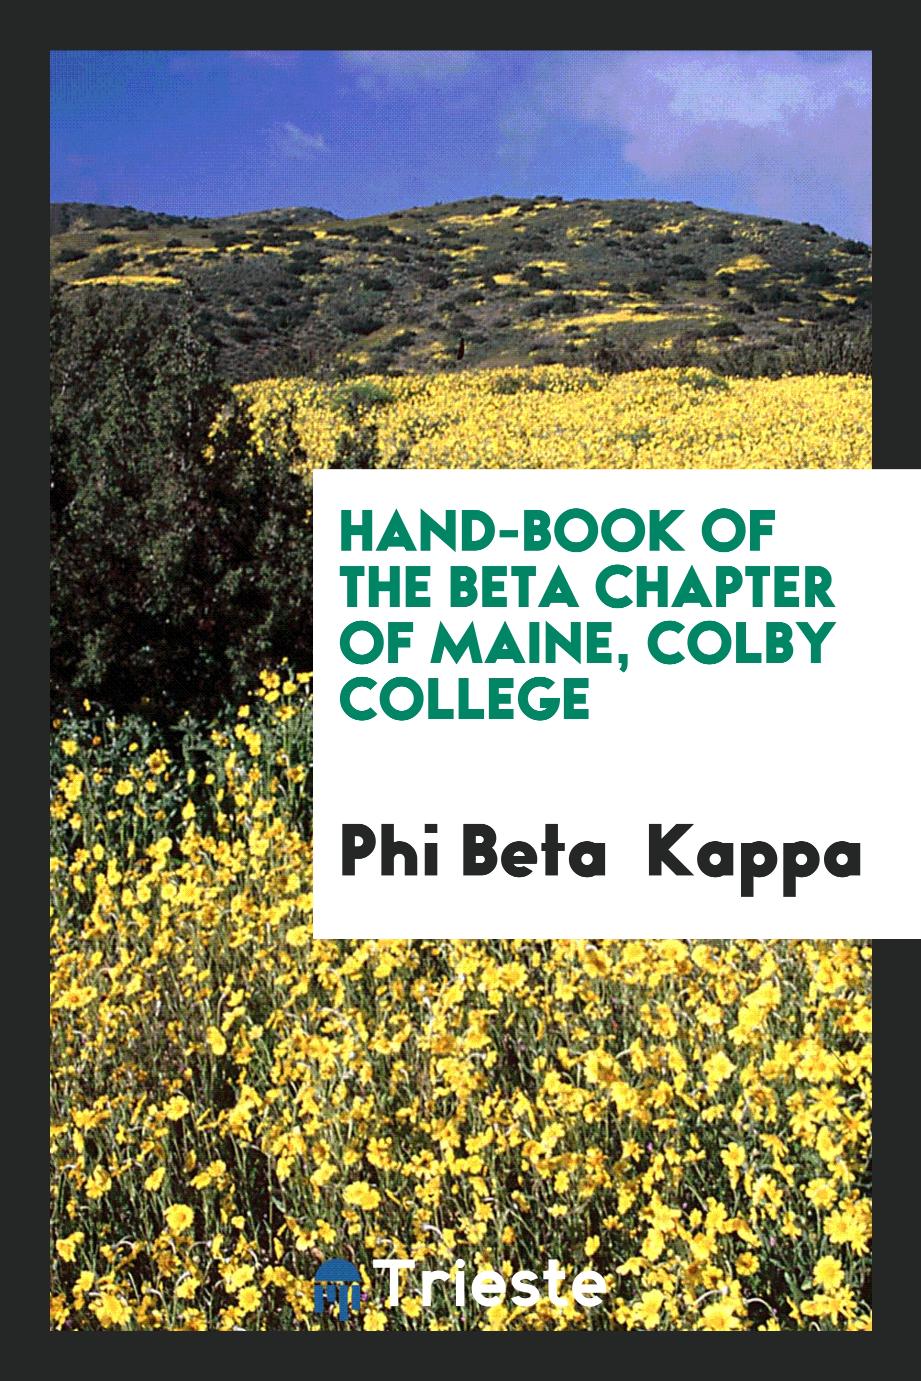 Hand-book of the Beta Chapter of Maine, Colby College